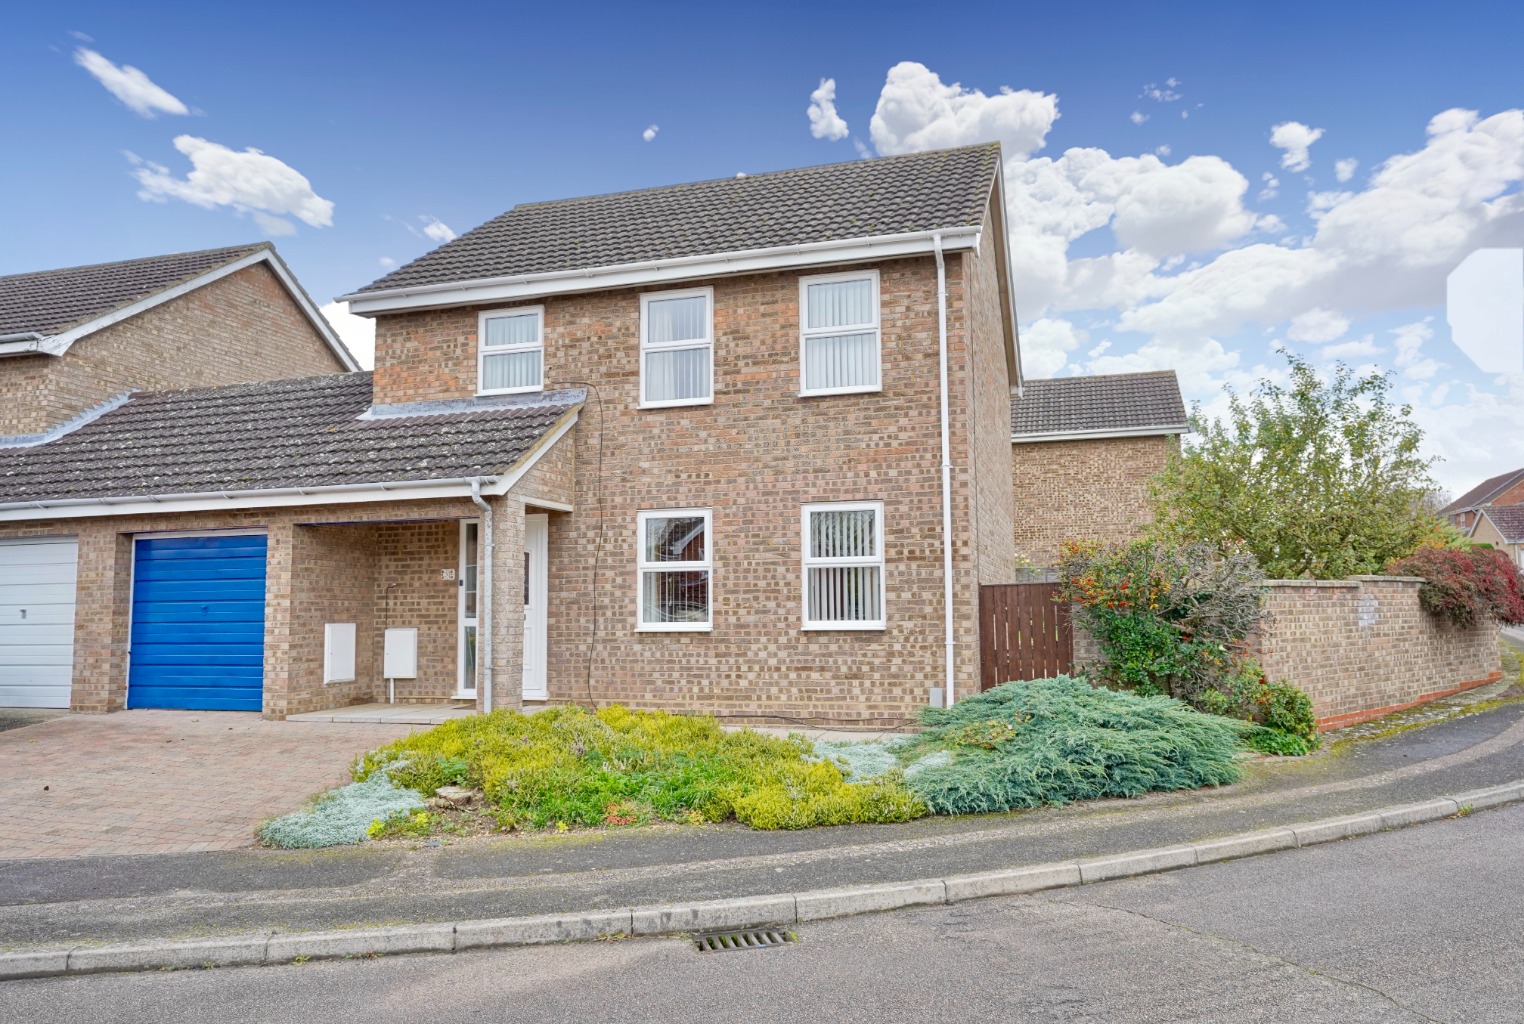 Giggs and Company are pleased to offer this spacious four bedroom home set in a large corner plot in a quiet cul-de-sac. The property has a spacious lounge/diner, ground floor wc, single garage and ample parking. Don't miss out and contact us to arrange your viewing...